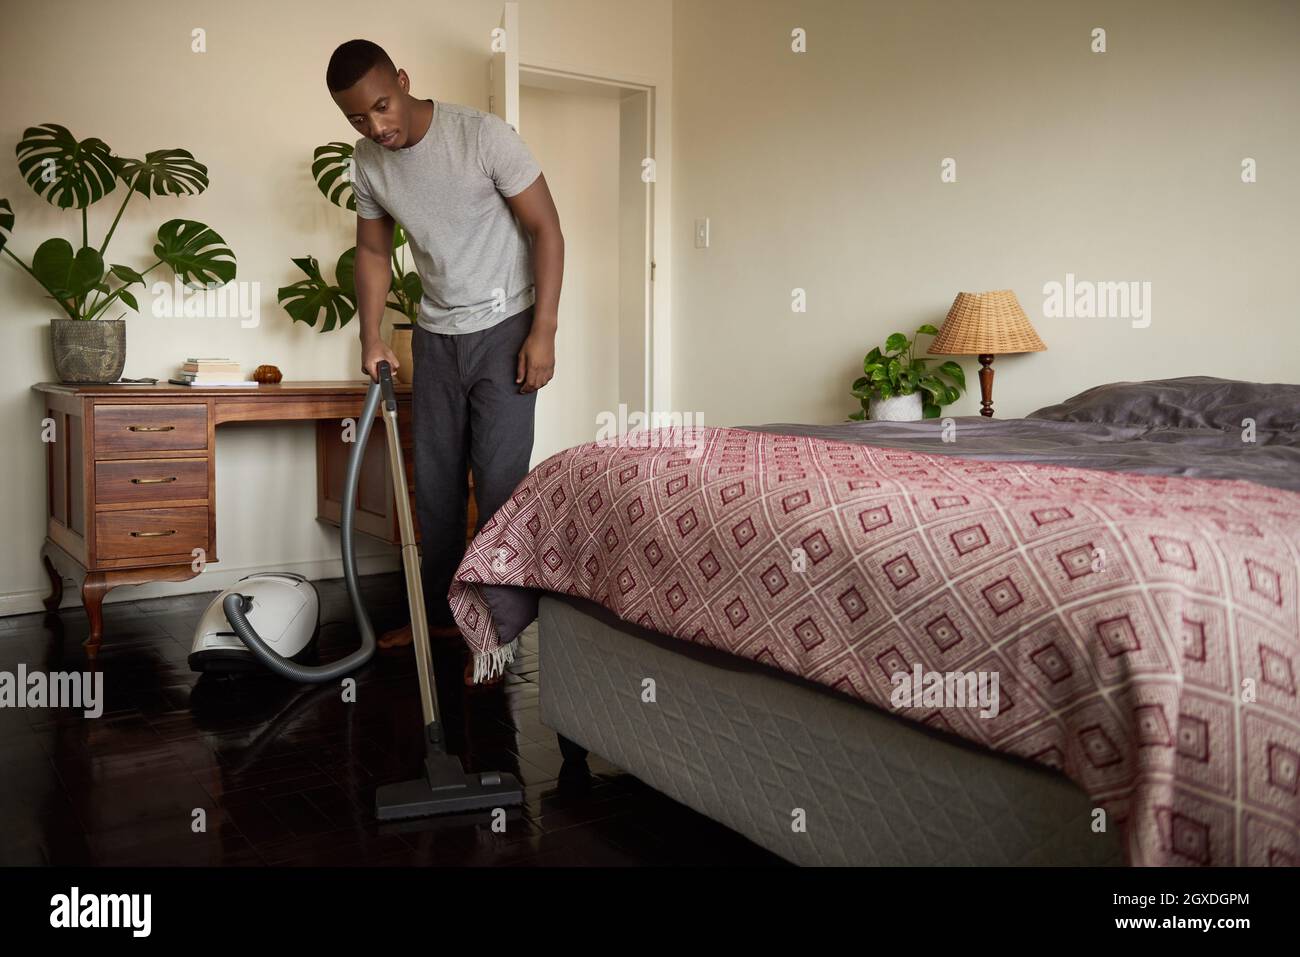 Young African man vacuuming his bedroom floor at home Stock Photo